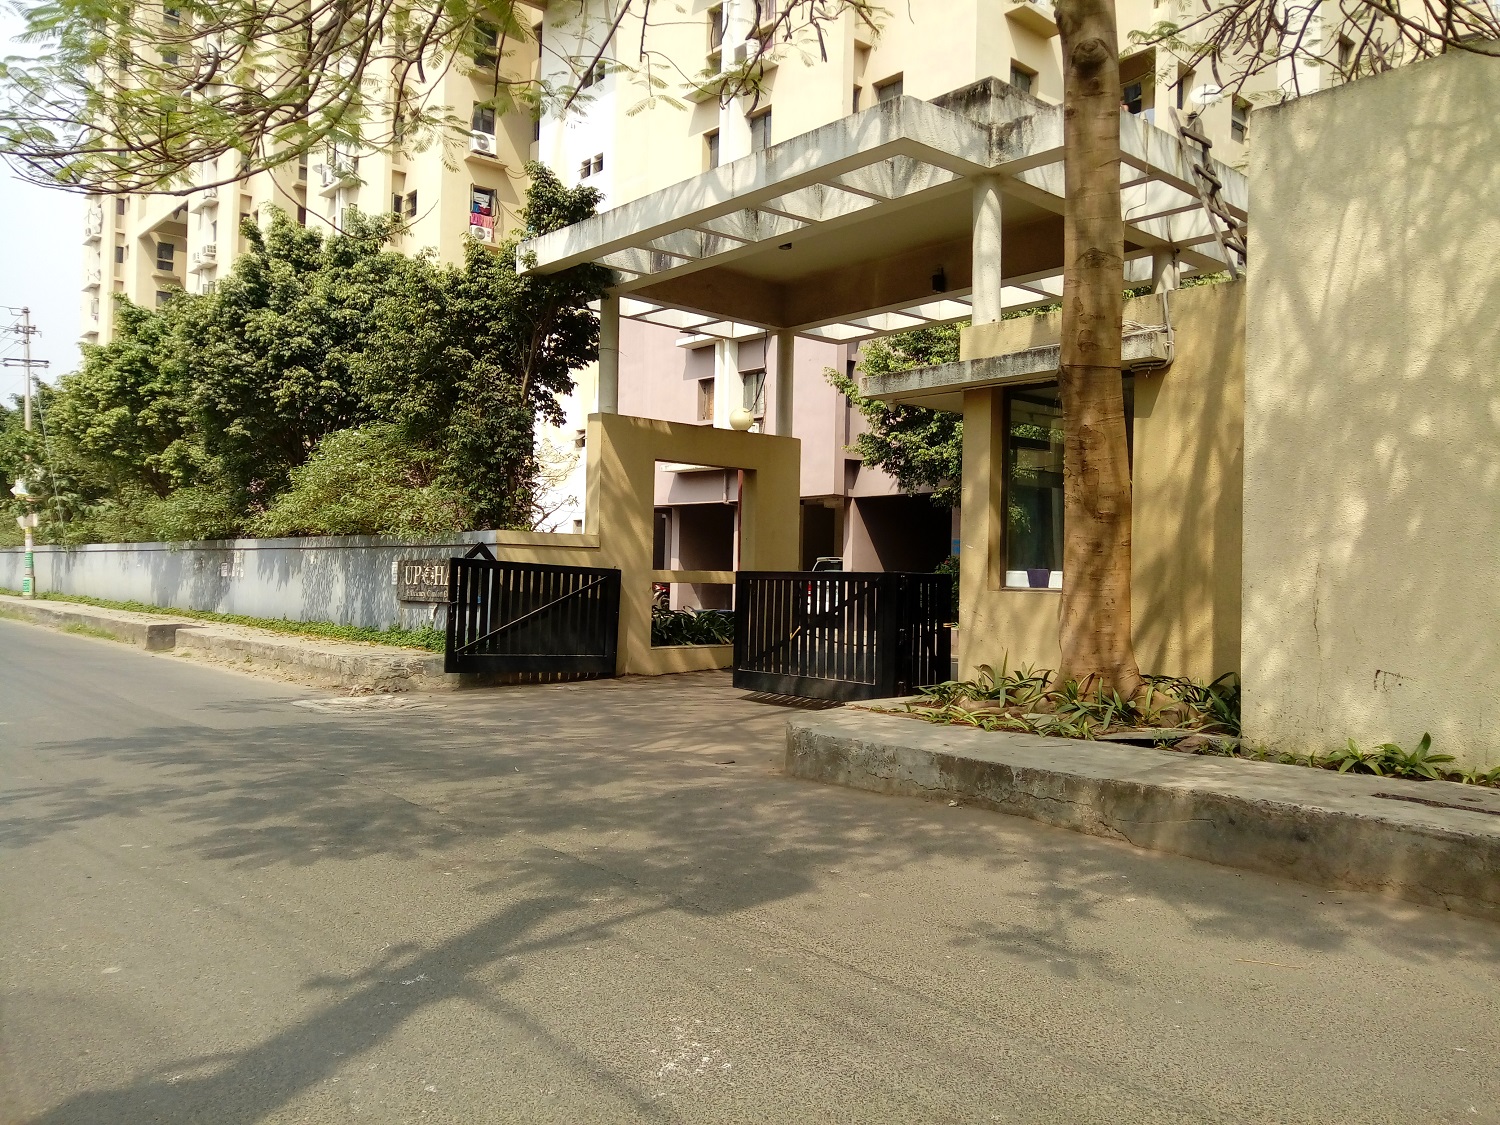 2 BHK 2 Baths Residential Flat 836for Rent